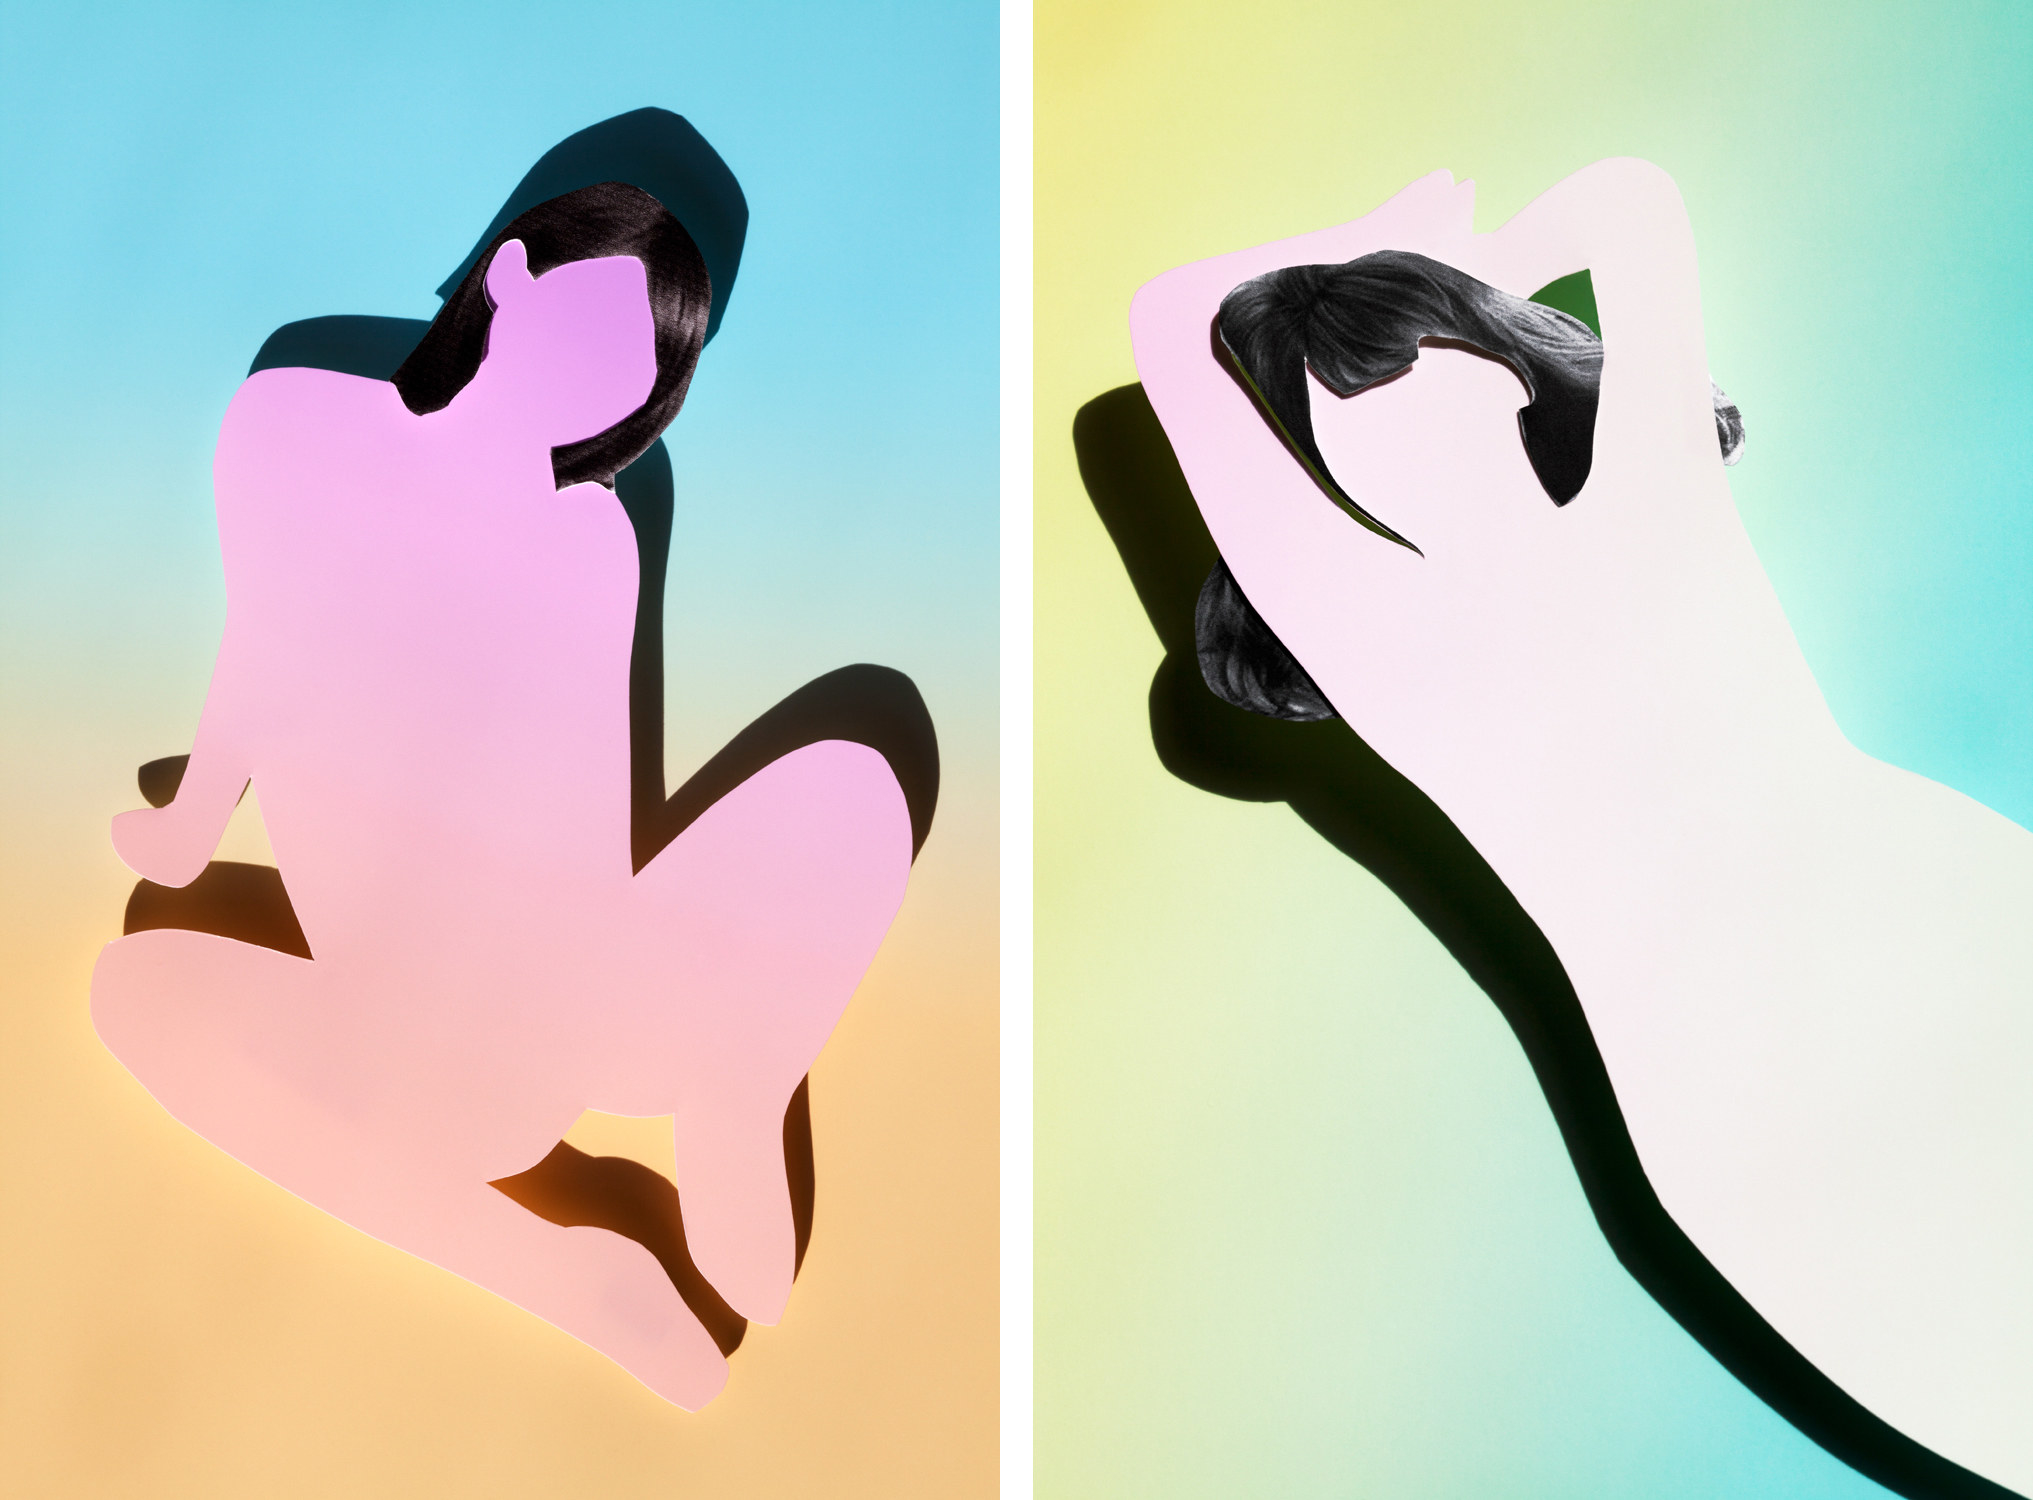 Colorful silhouettes and outlines of two naked women without faces